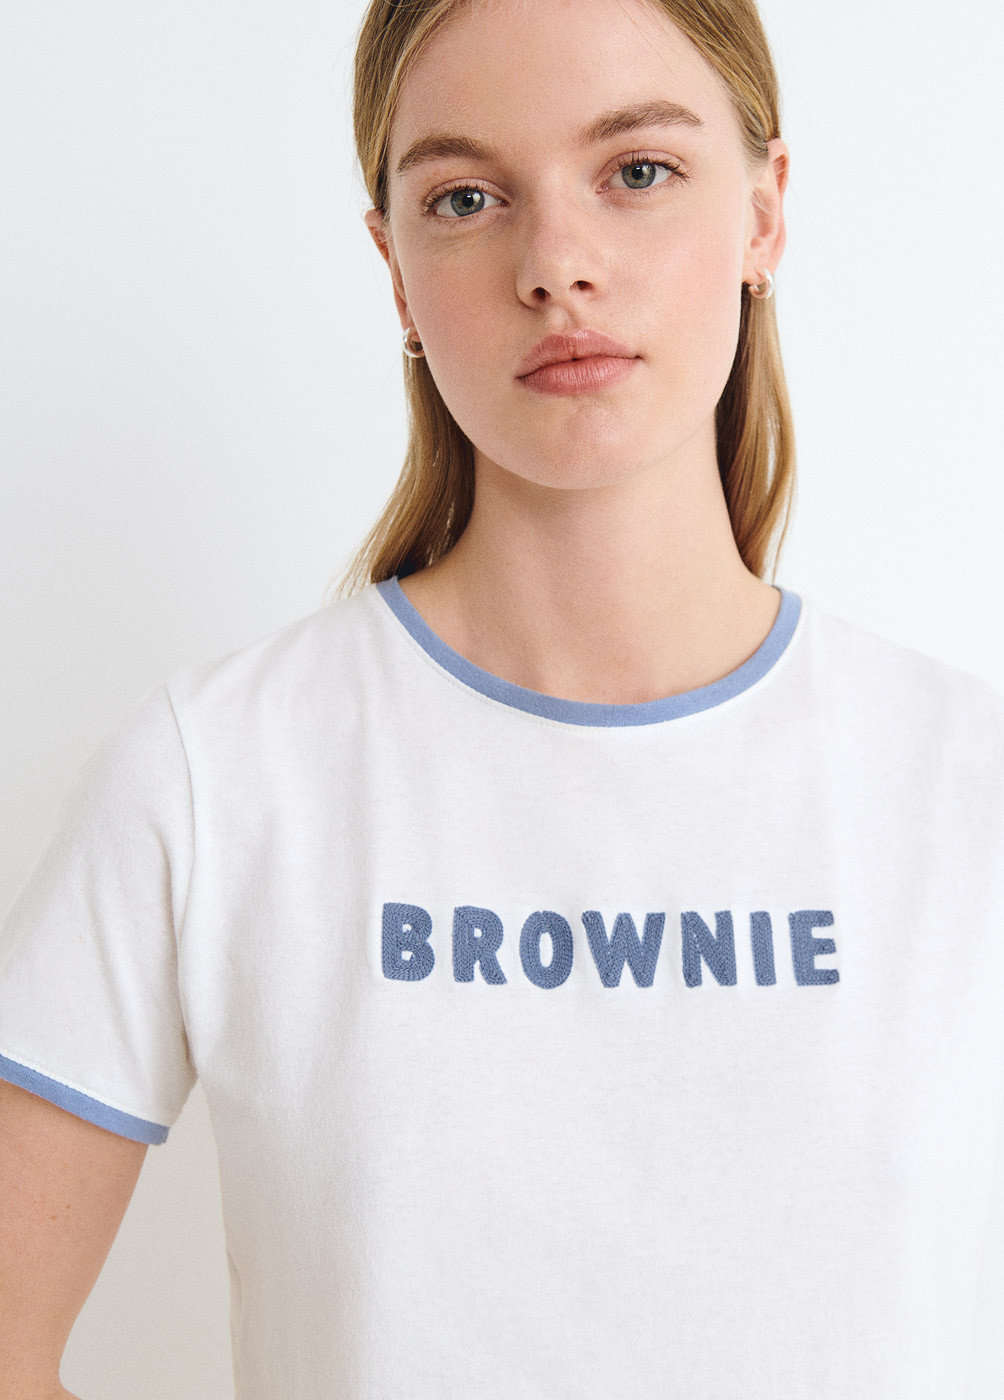 Brownie embroidered t-shirt...